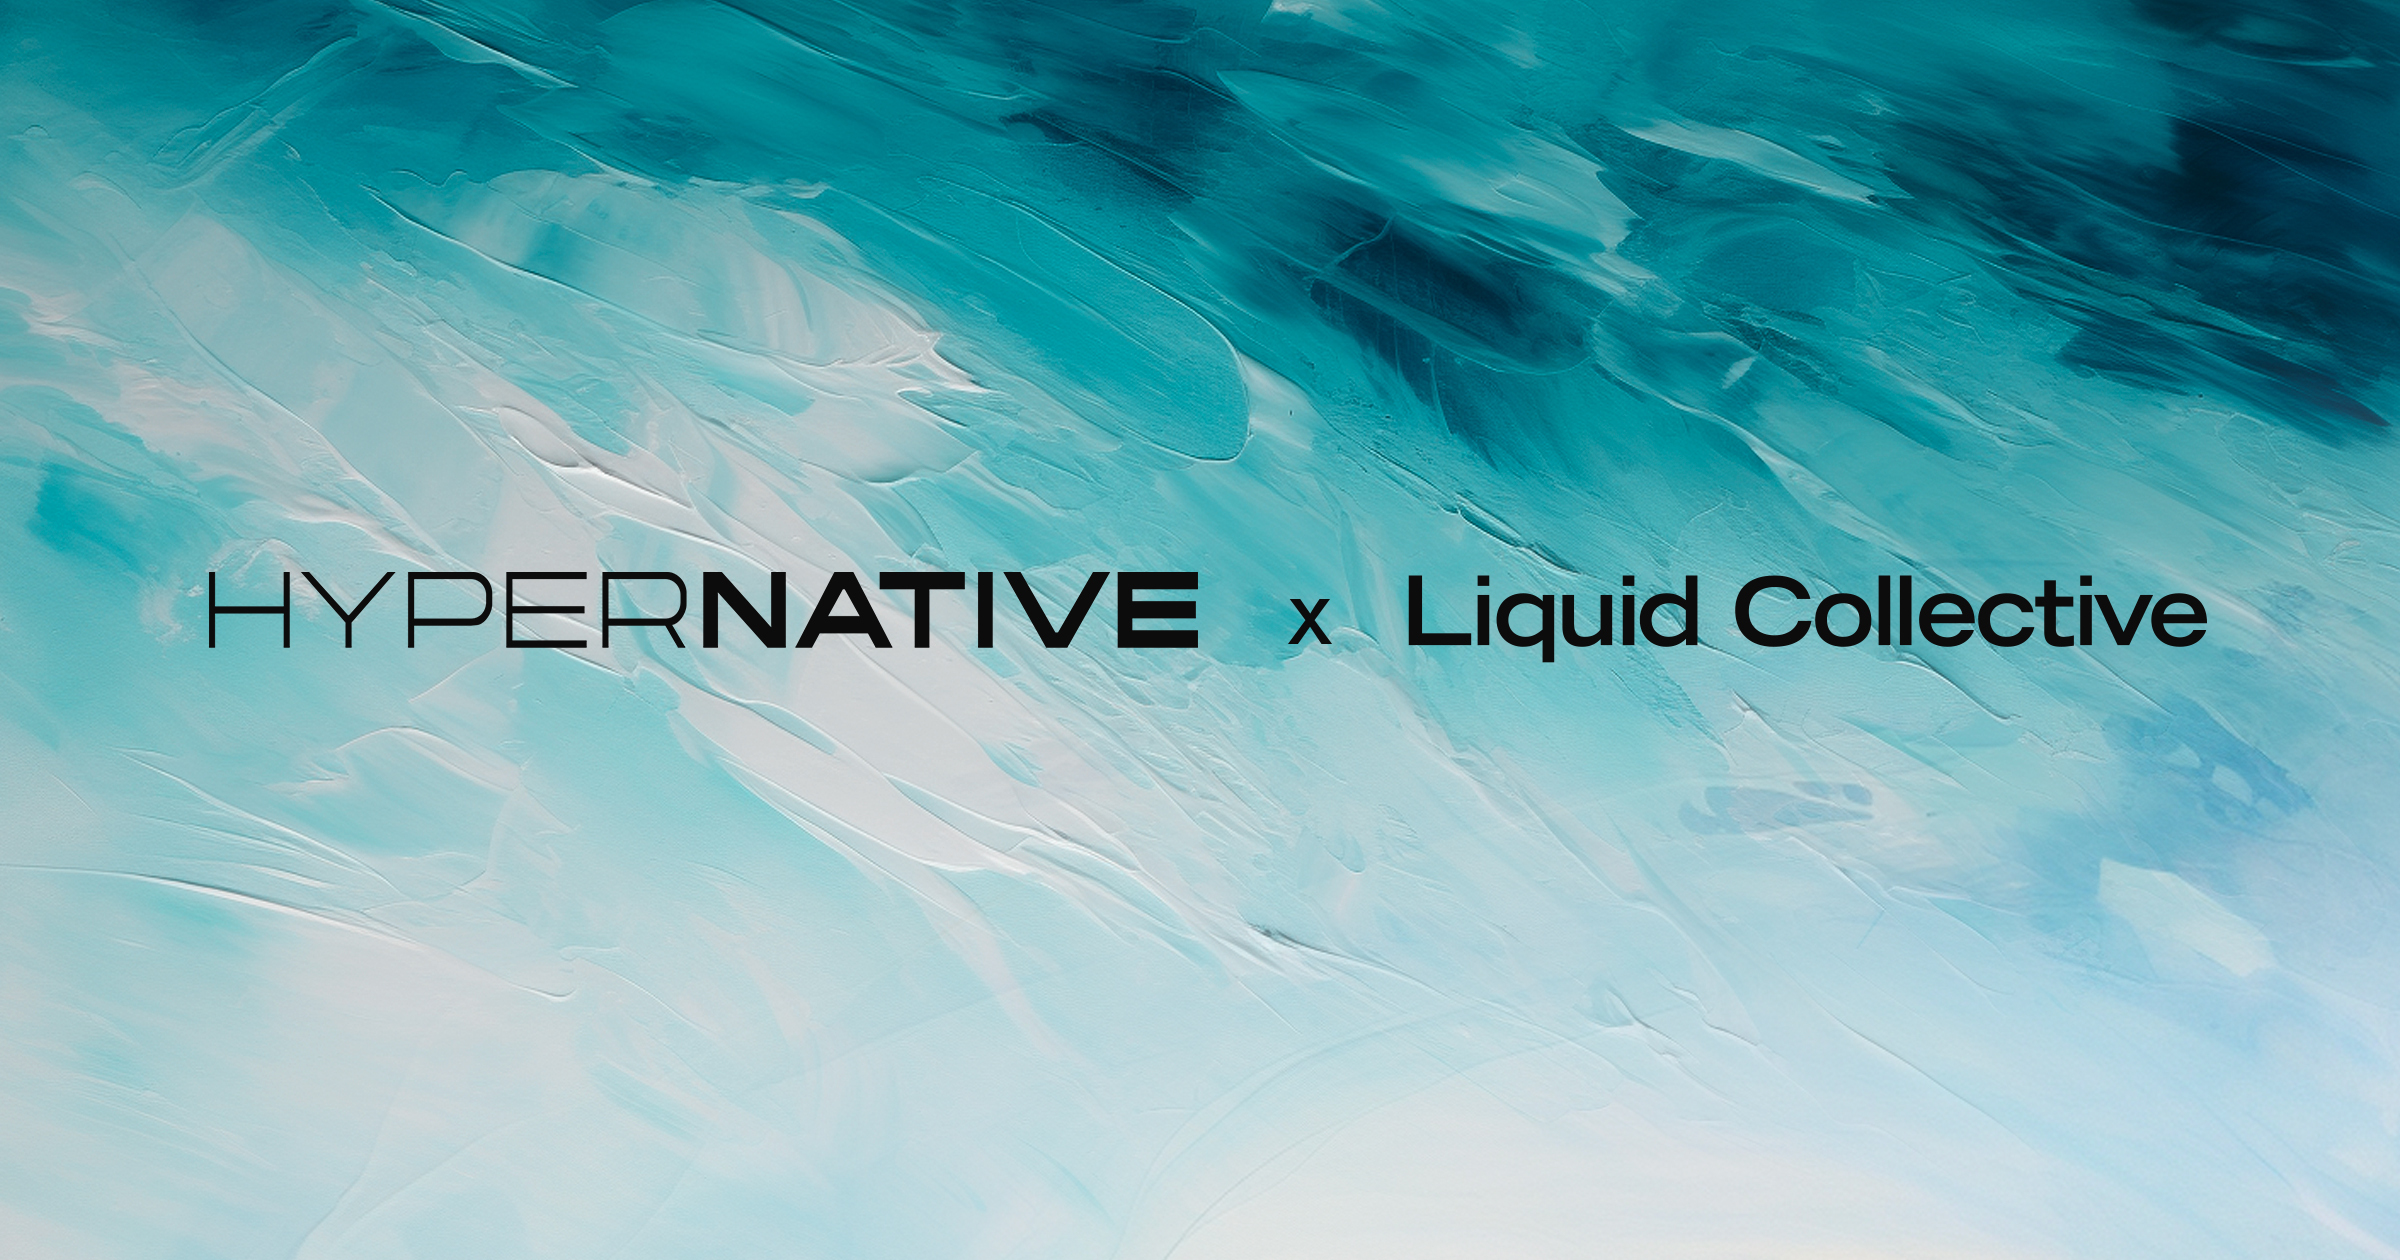 Hypernative & Liquid Collective collaborate to develop industry-leading protocol threat monitoring platform